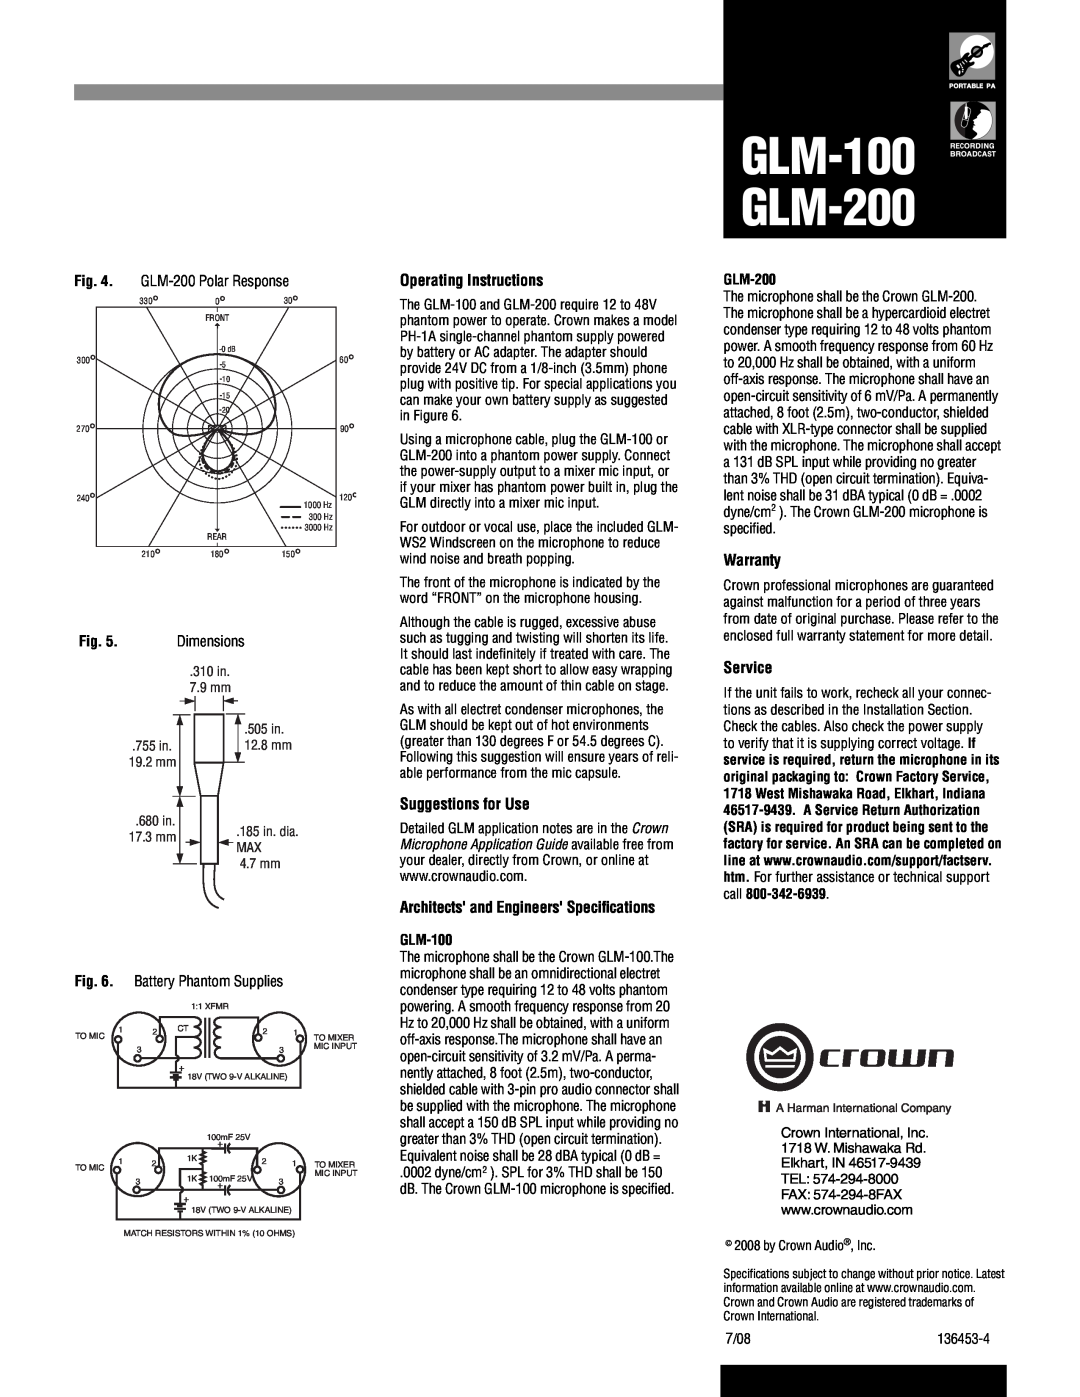 Crown Audio GLM-200 Operating Instructions, Suggestions for Use, Architects and Engineers Speciﬁcations, Warranty, Service 